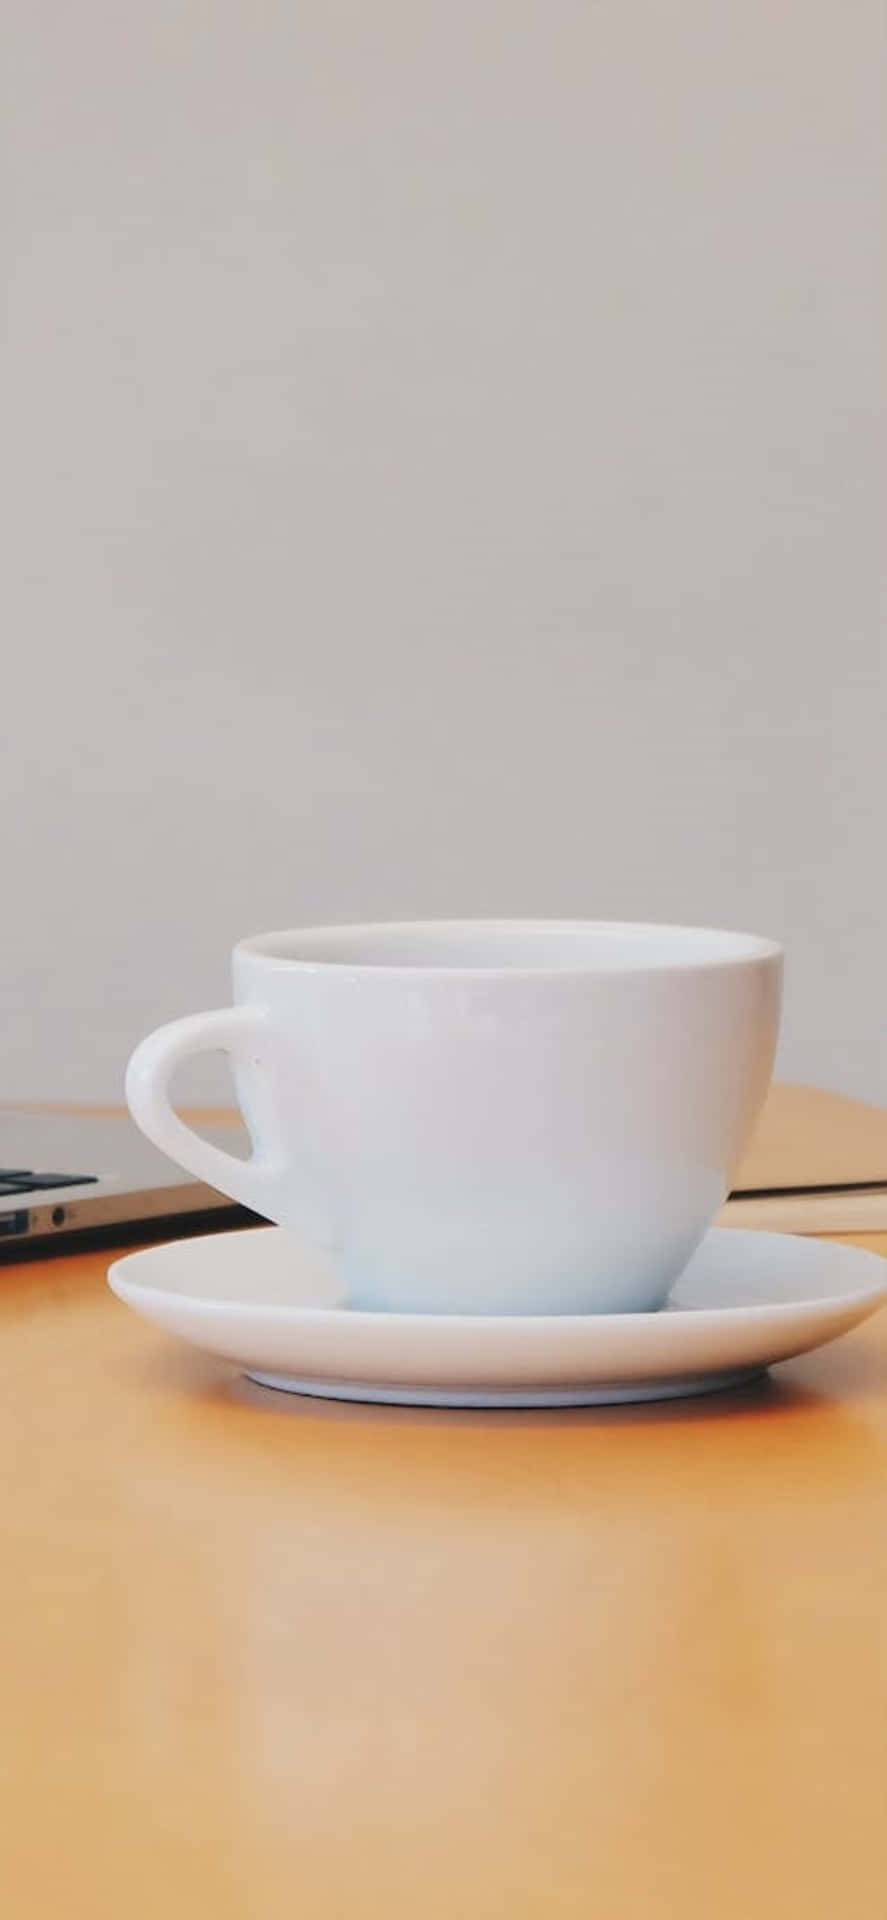 Iphone X Desk Background White Coffee Cup